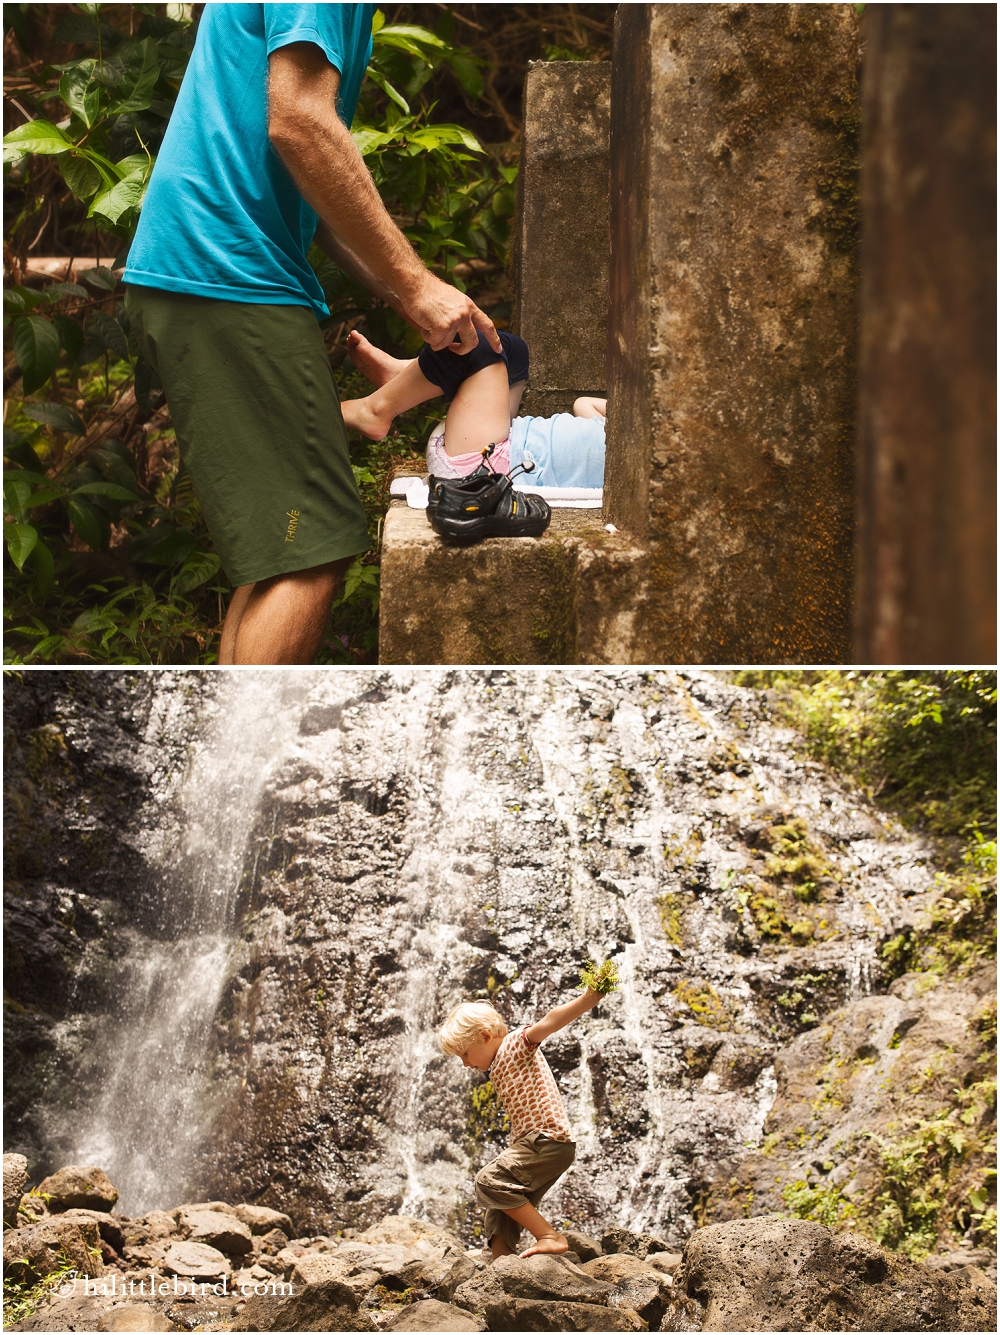 a quick diaper change during a watefall hike